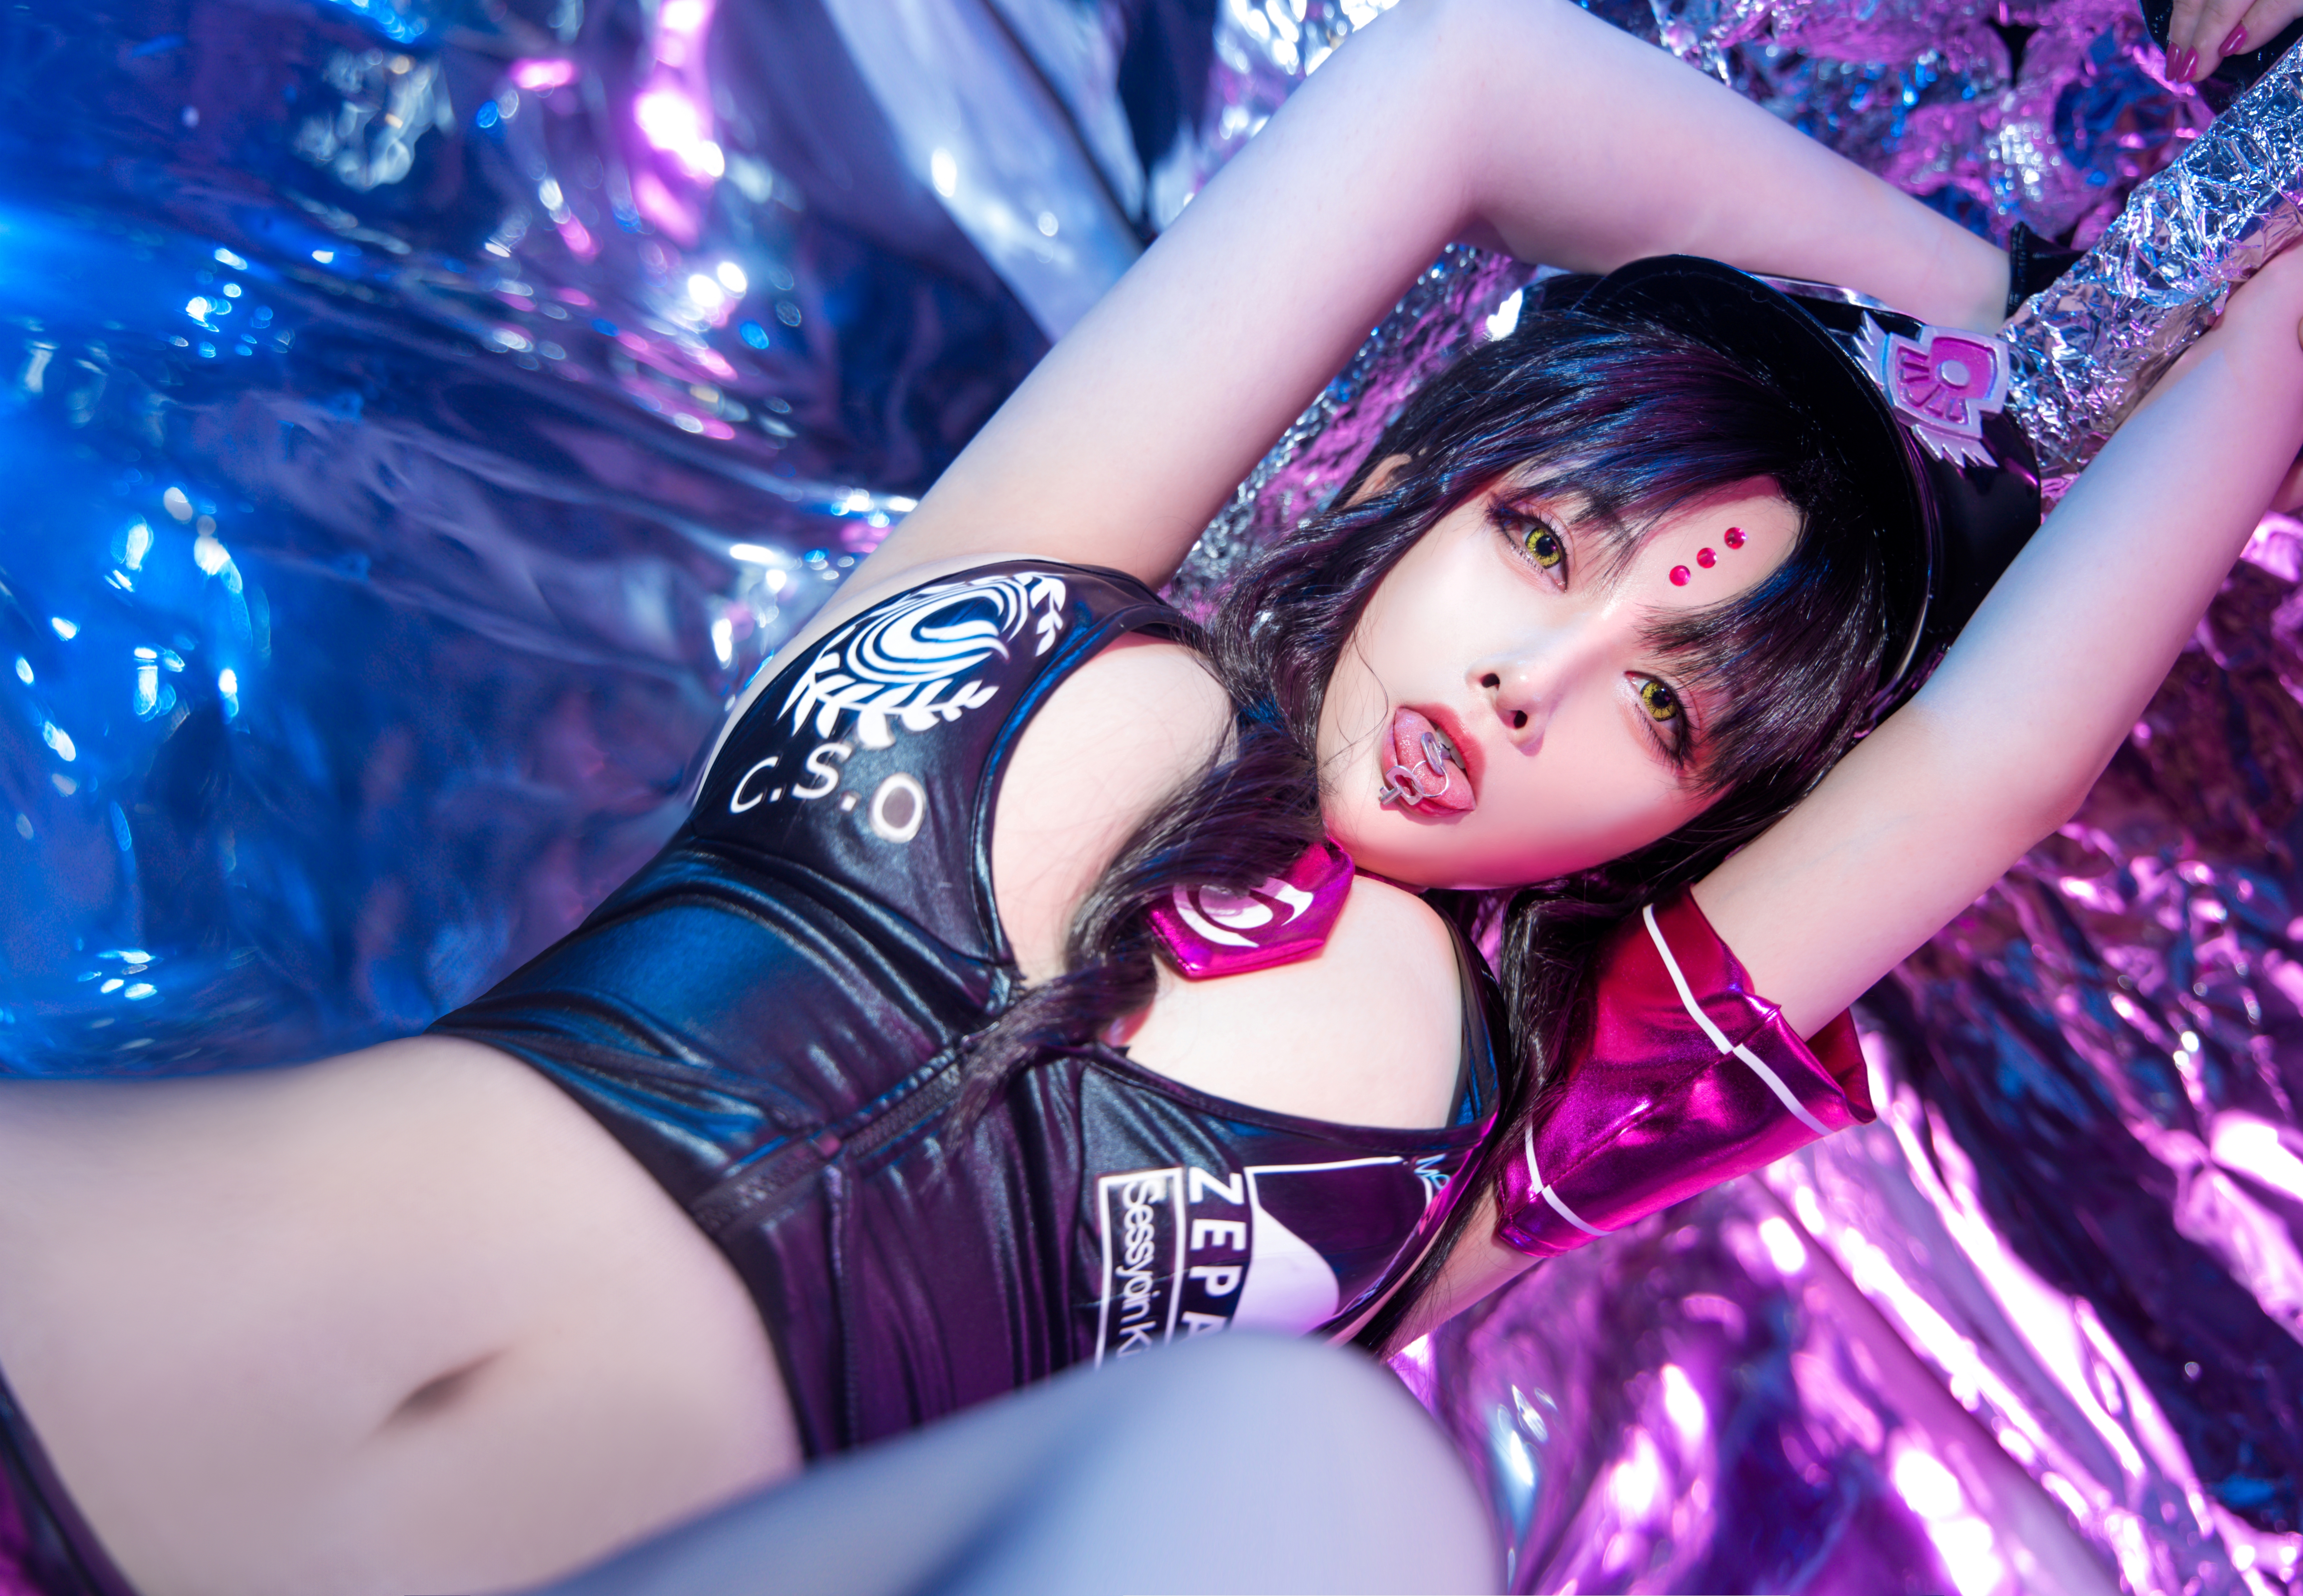 People 6464x4480 women model cosplay Kiara Sesshouin Fate series Fate/Grand Order police women underwear looking at viewer handcuffed bra zipper cleavage belly tongue out keys armlet tie studio indoors women indoors Asian NiannianD